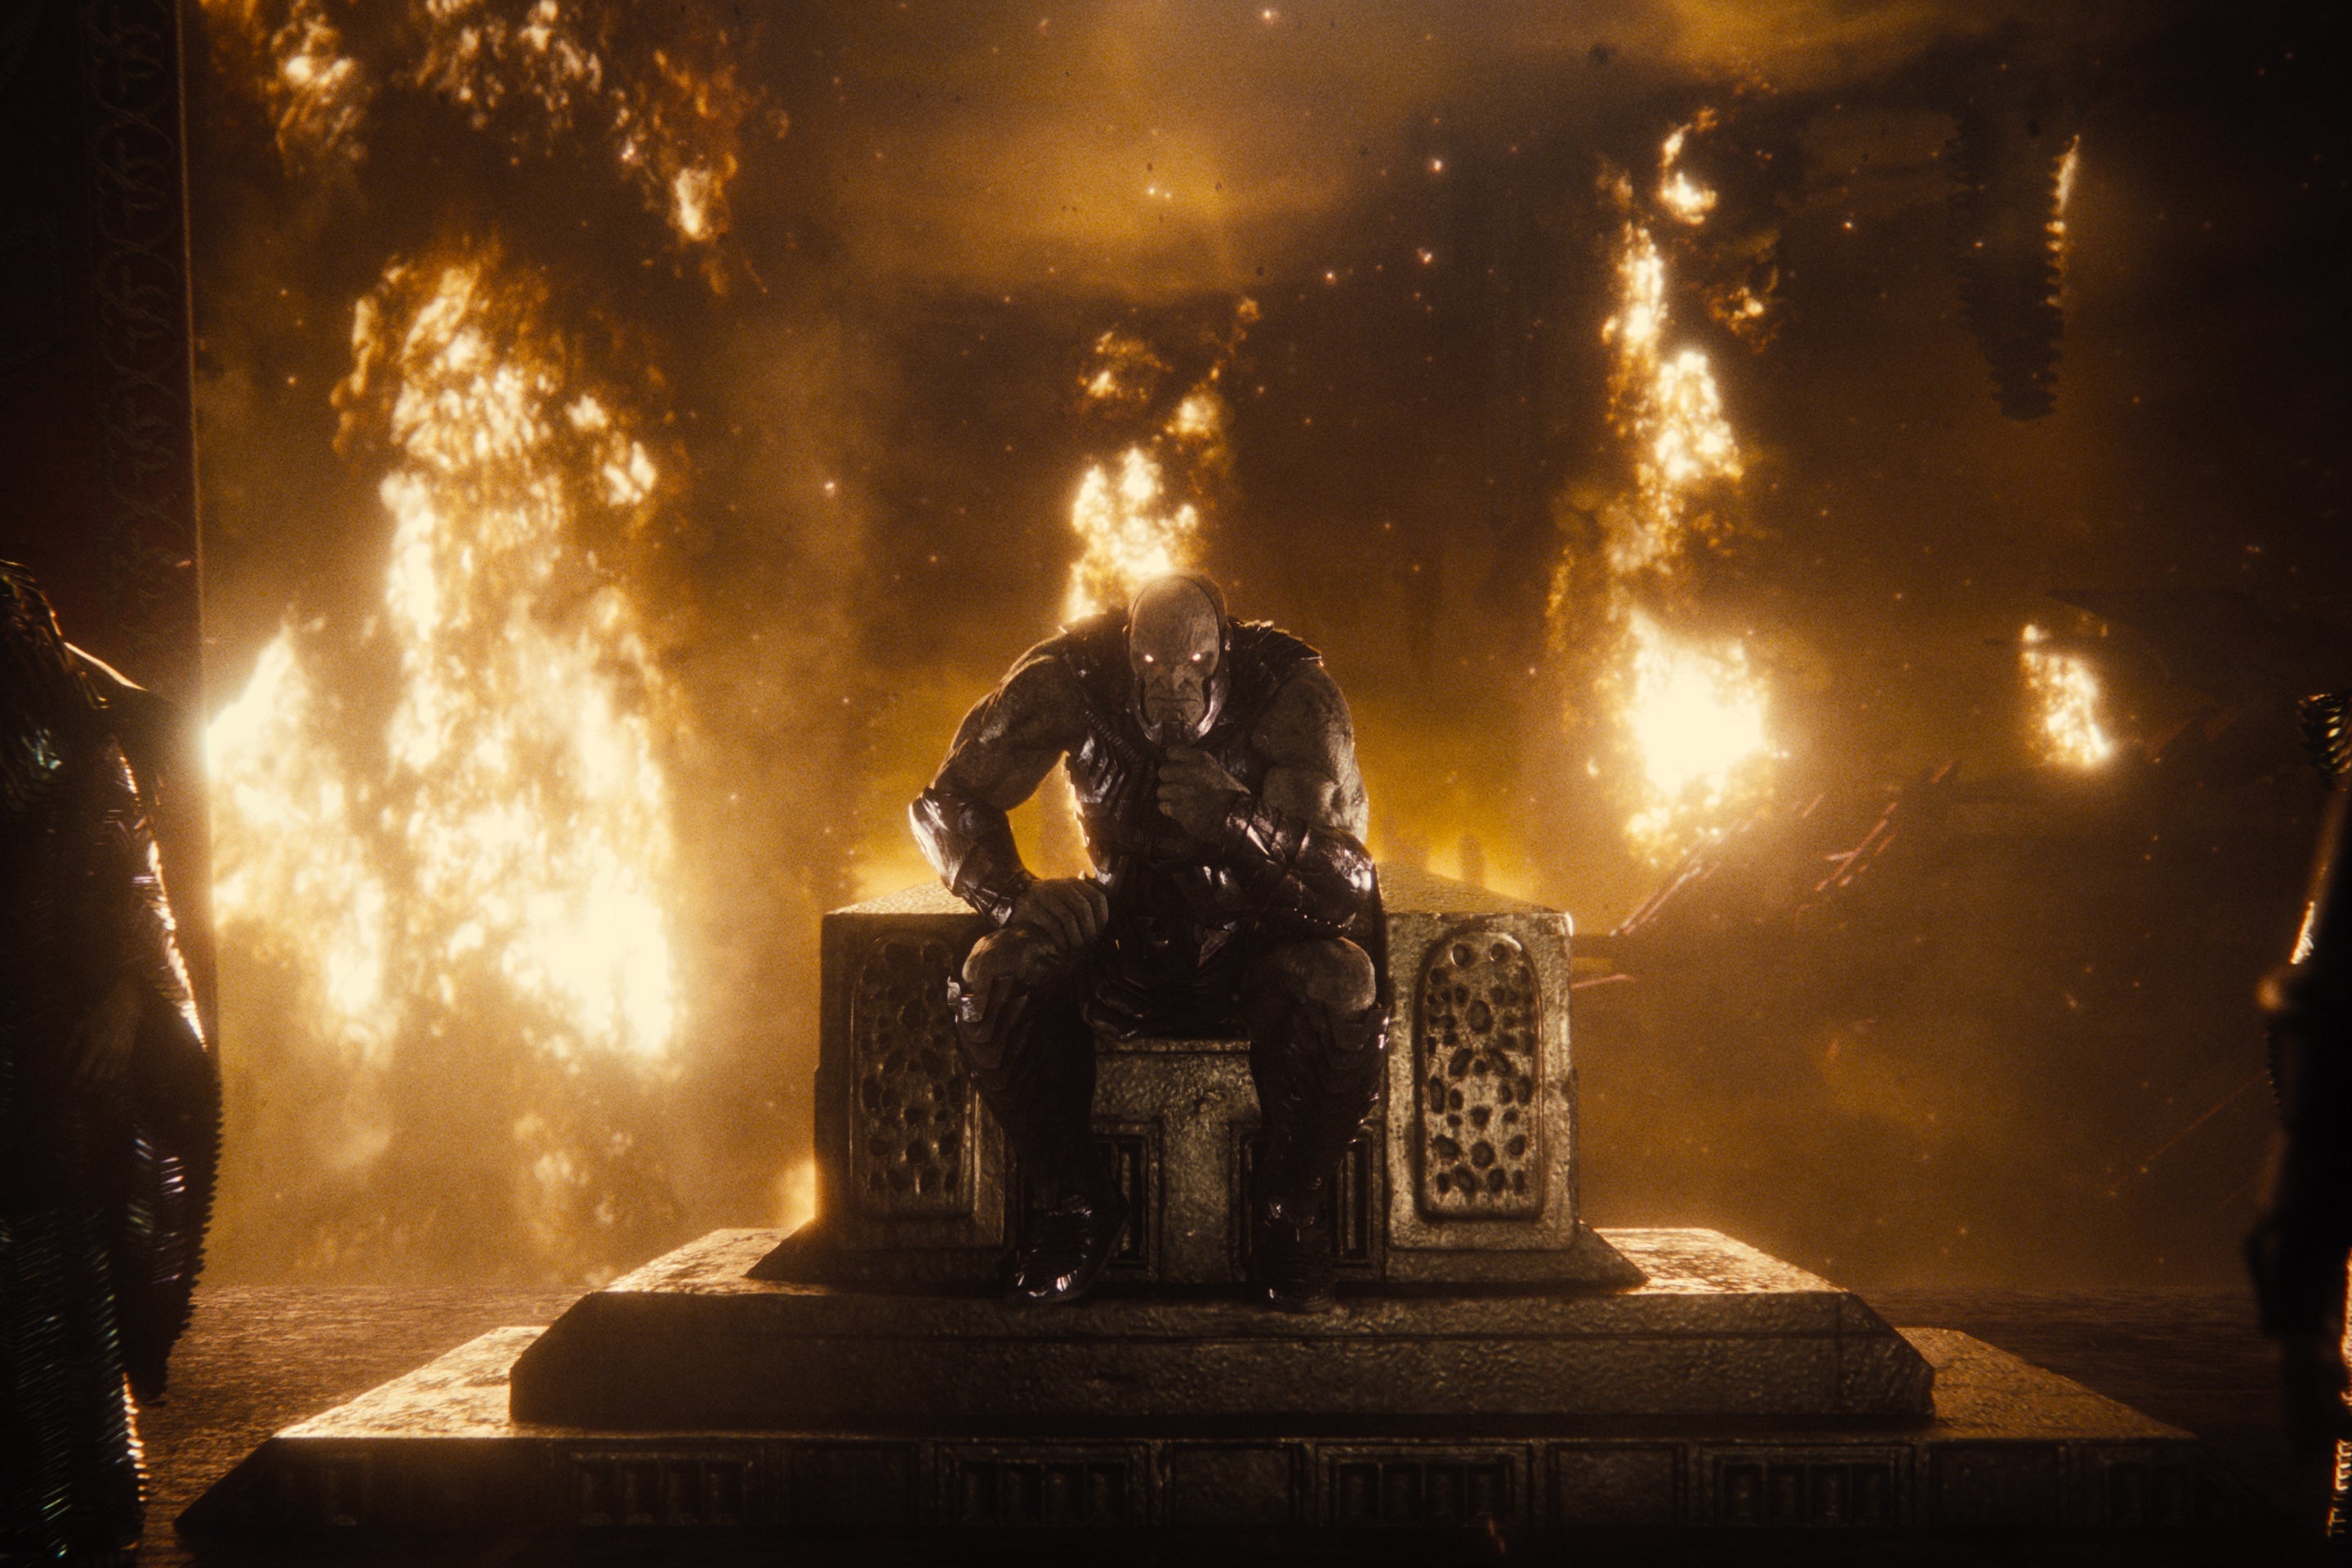 A masked figure sits on a throne in front of a flaming backdrop.